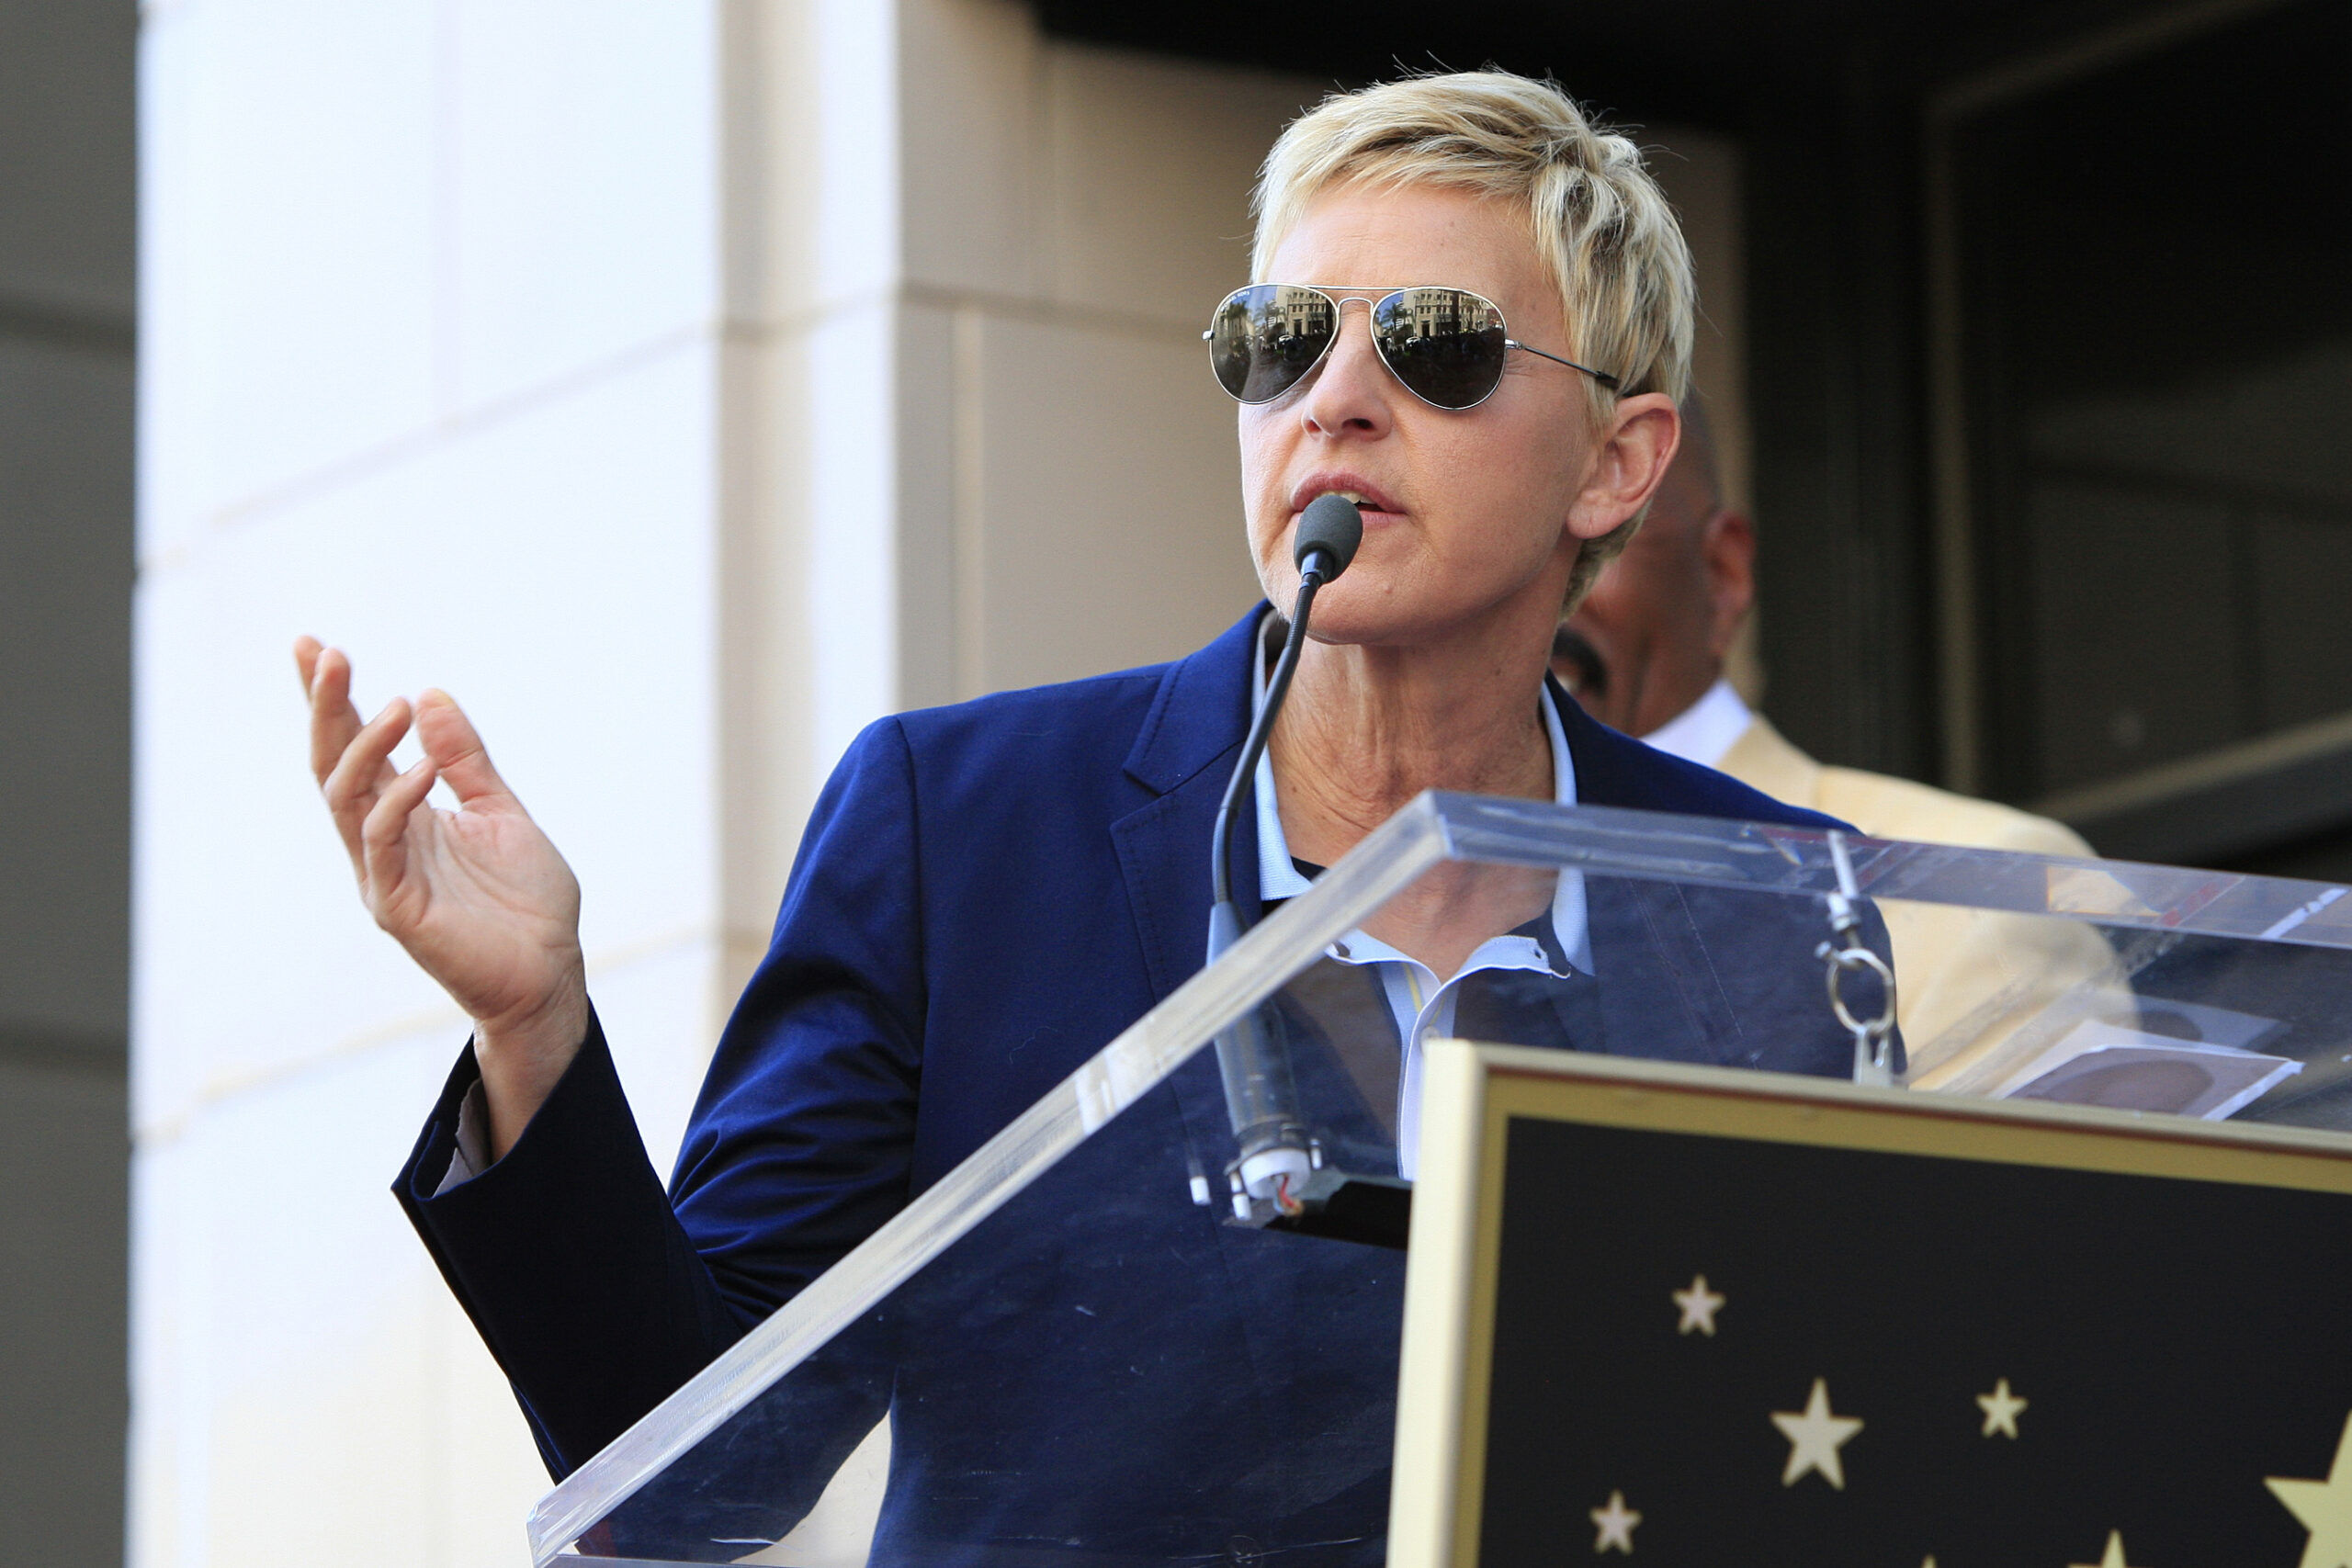 Ellen DeGeneres at a ceremony where Steve Harvey is honored with a star on the Hollywood Walk Of Fame on May 13, 2013 in Los Angeles, California